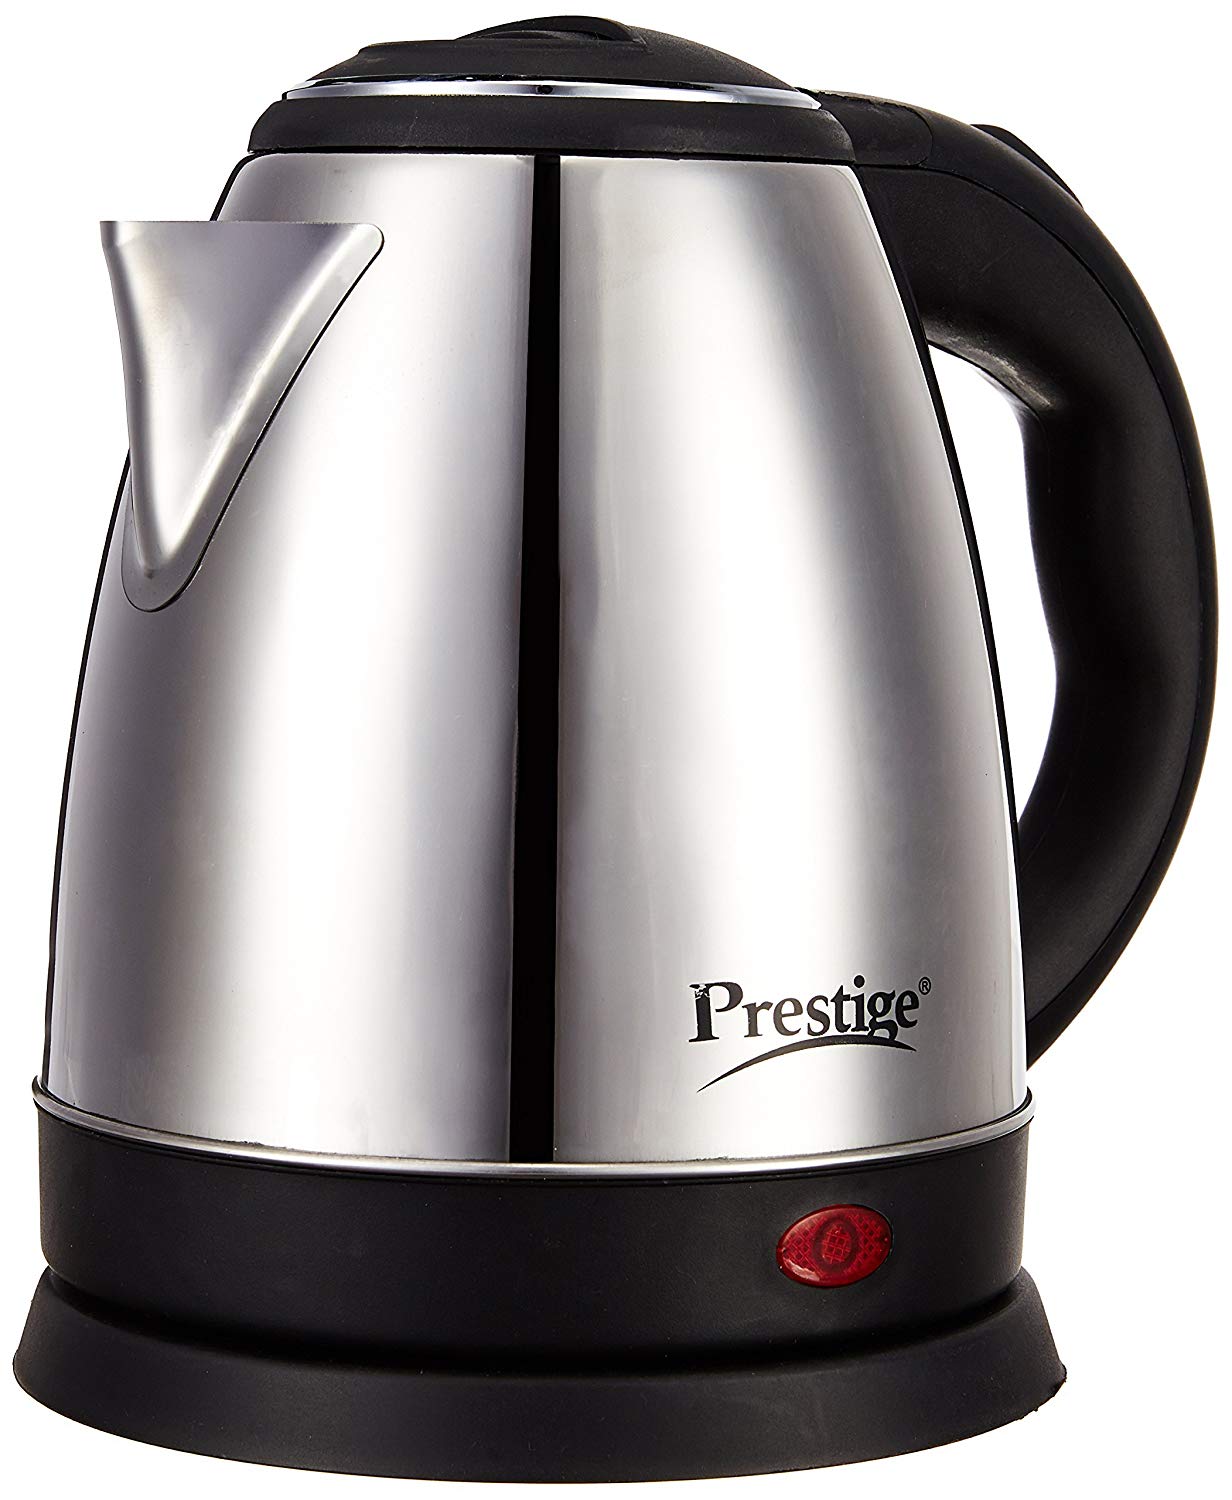 Amazon Offers – Buy Prestige PKOSS 1.8 Litre 1500W Electric Kettle at Rs. 813 only